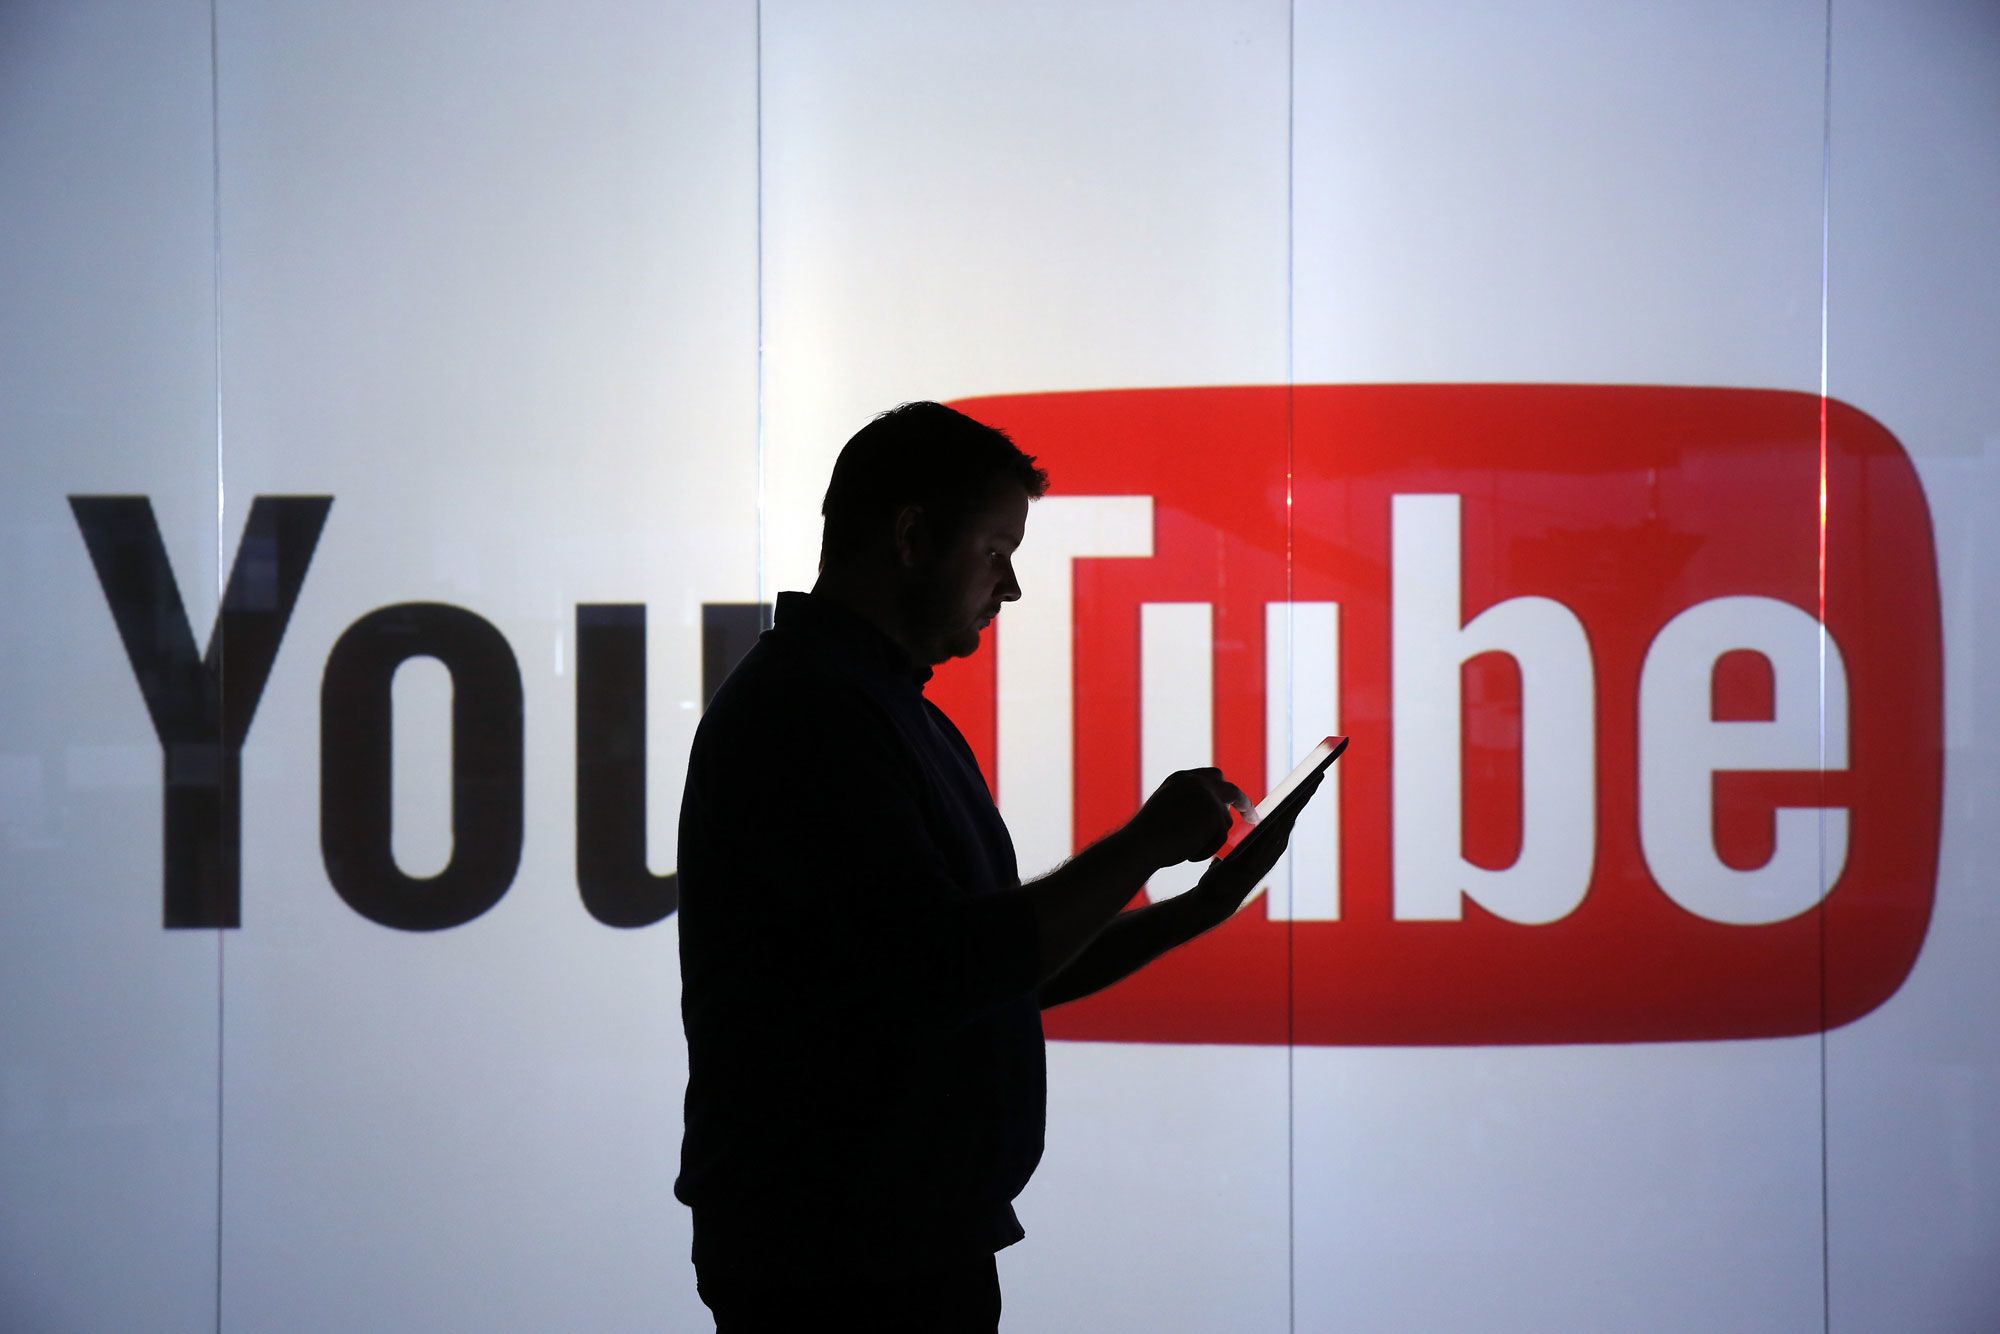 Utah man arrested for threatening to kill YouTube employees